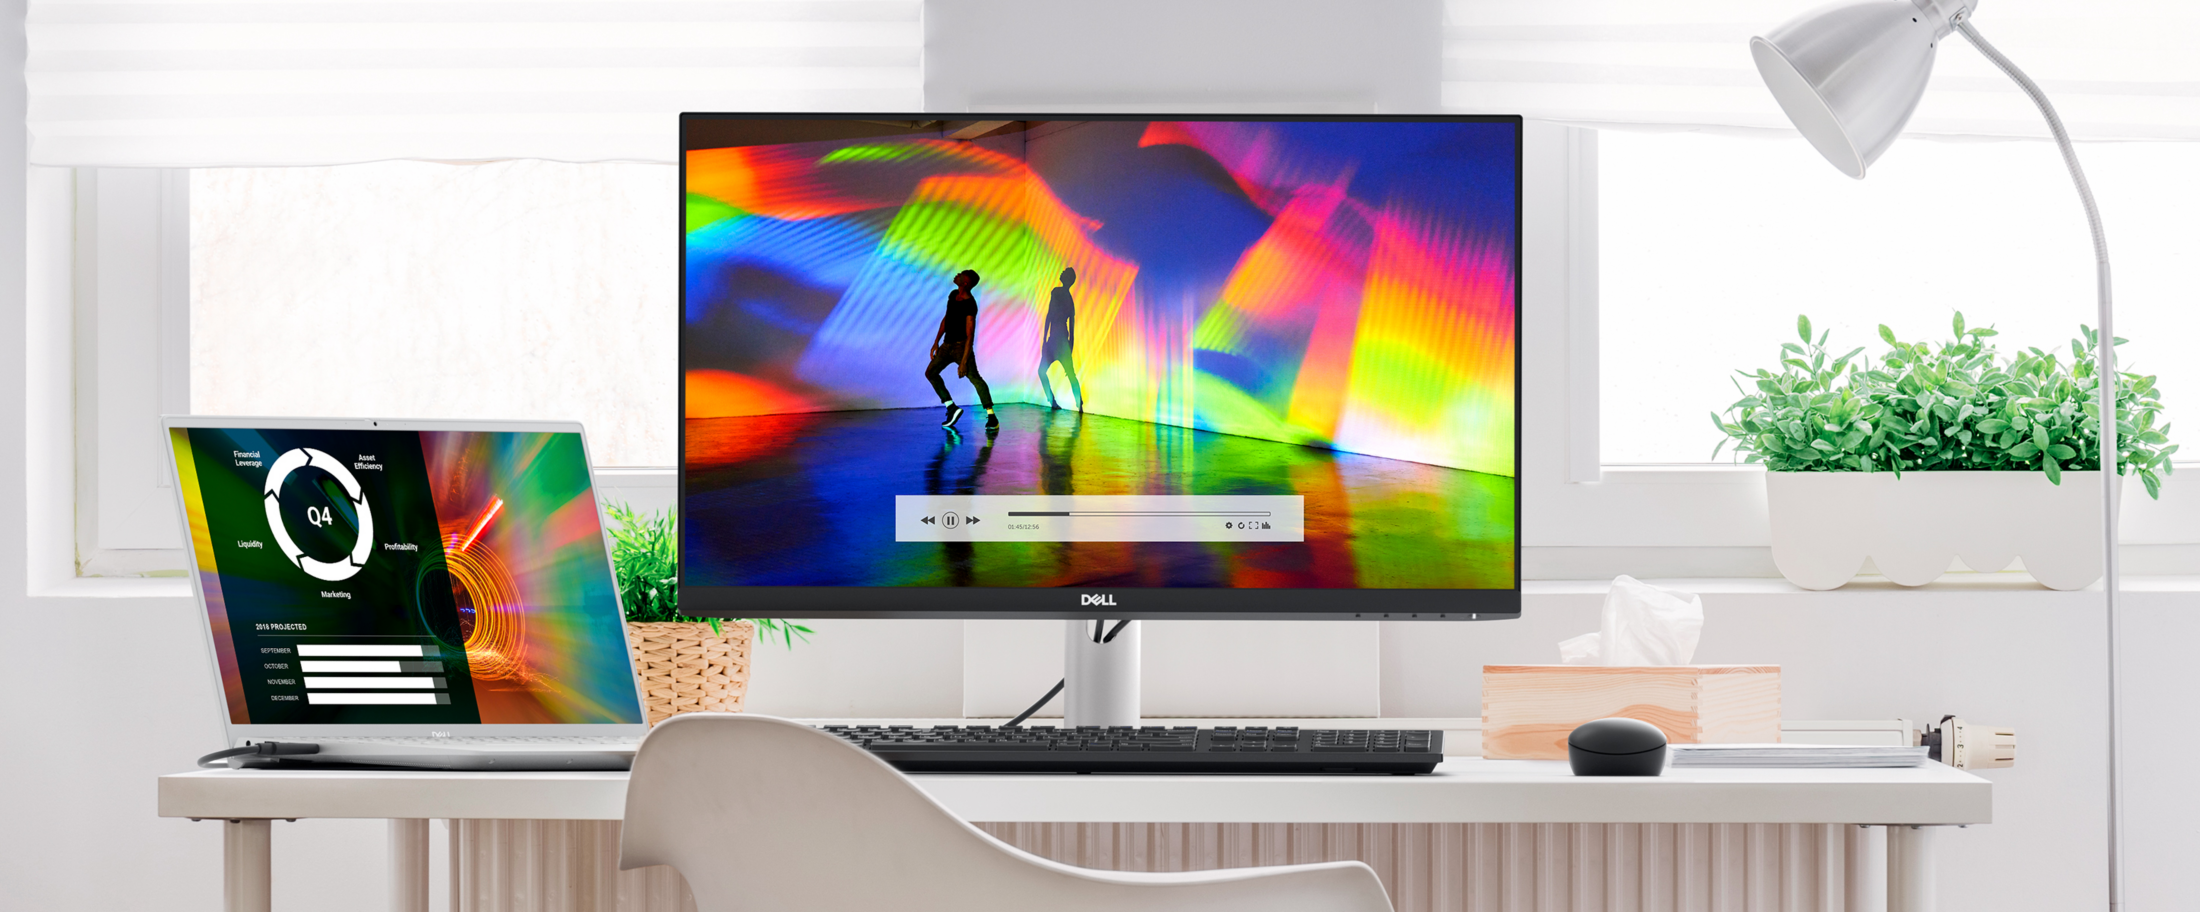 Dell 27 Monitor: S2721HN in-Plane Switching (IPS), AMD Free Sync, Full HD  1080p 1920 1080 at 75 Hz, Built-in Dual HDMI Ports, Three-Sided Ultrathin  Bezel.